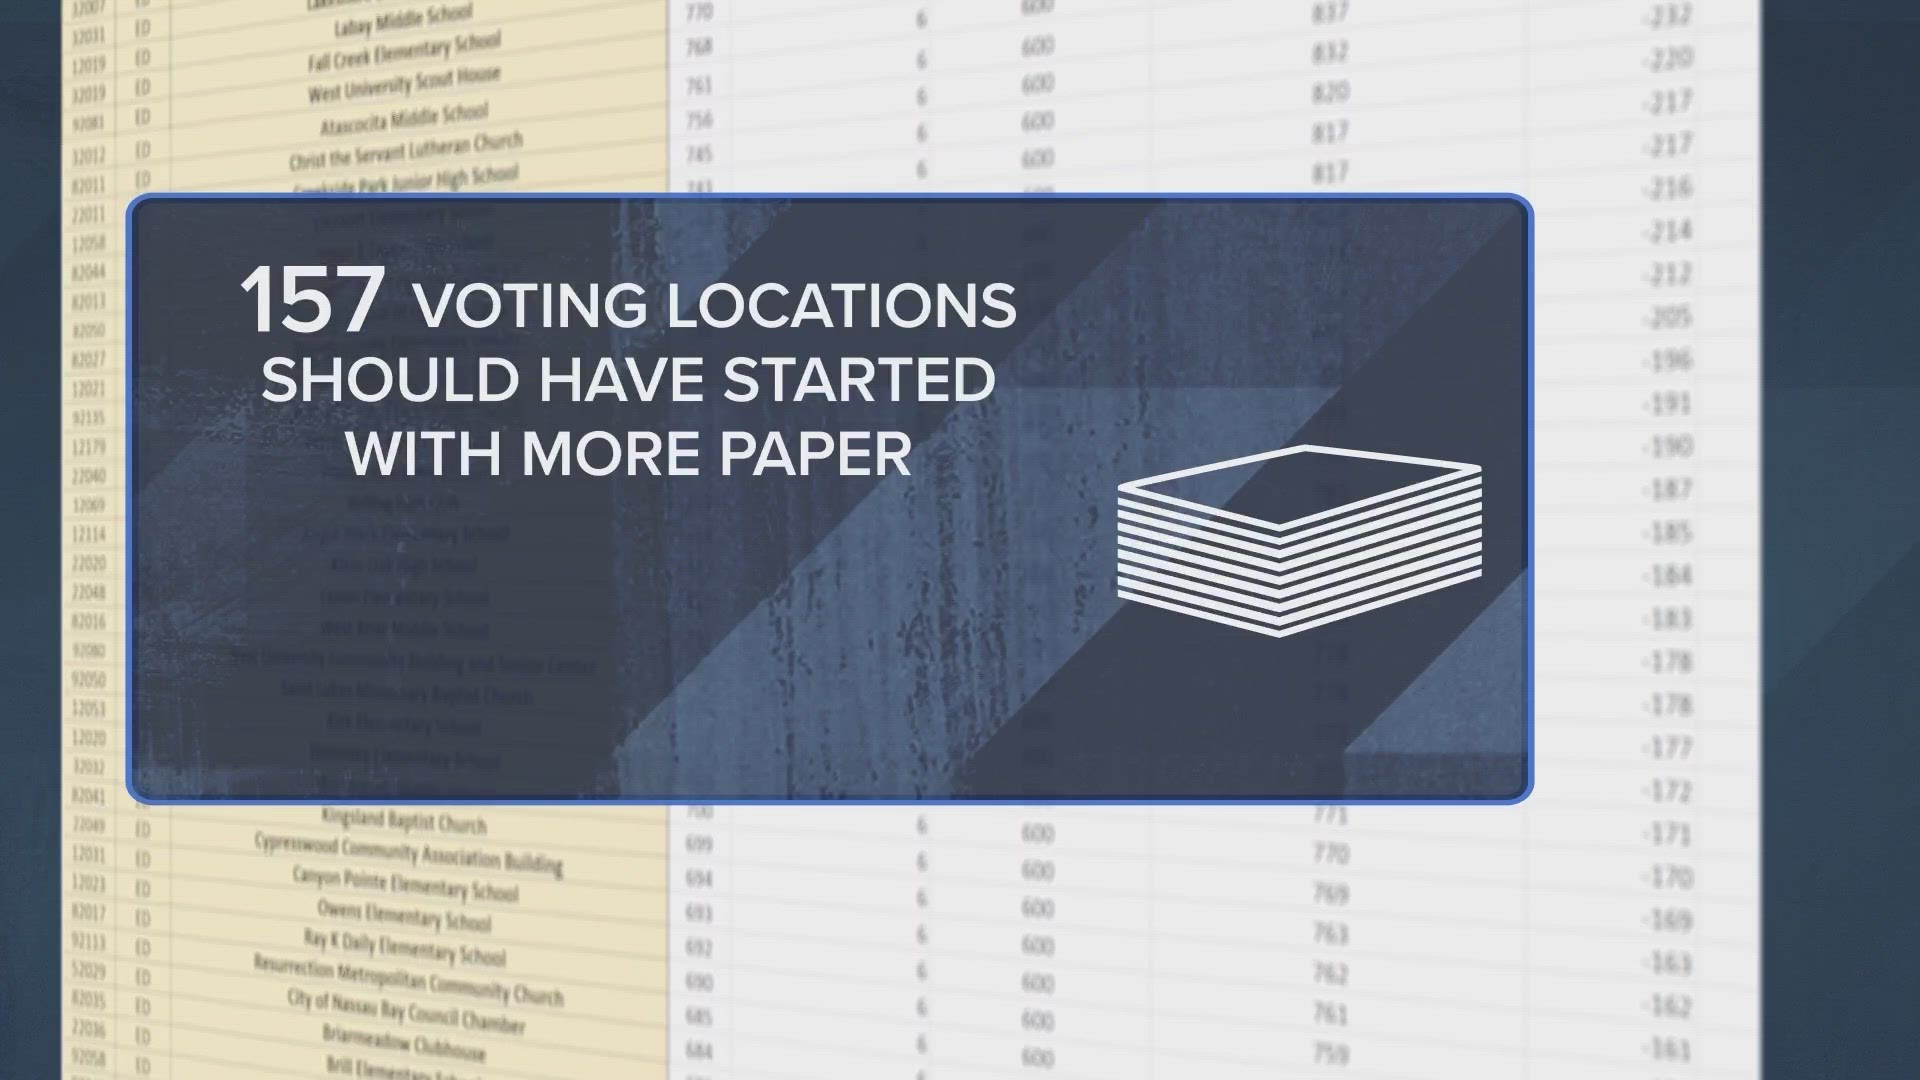 KHOU 11 Investigates discovered records reveal issues with the tracking system and initial paper ballot supplies.